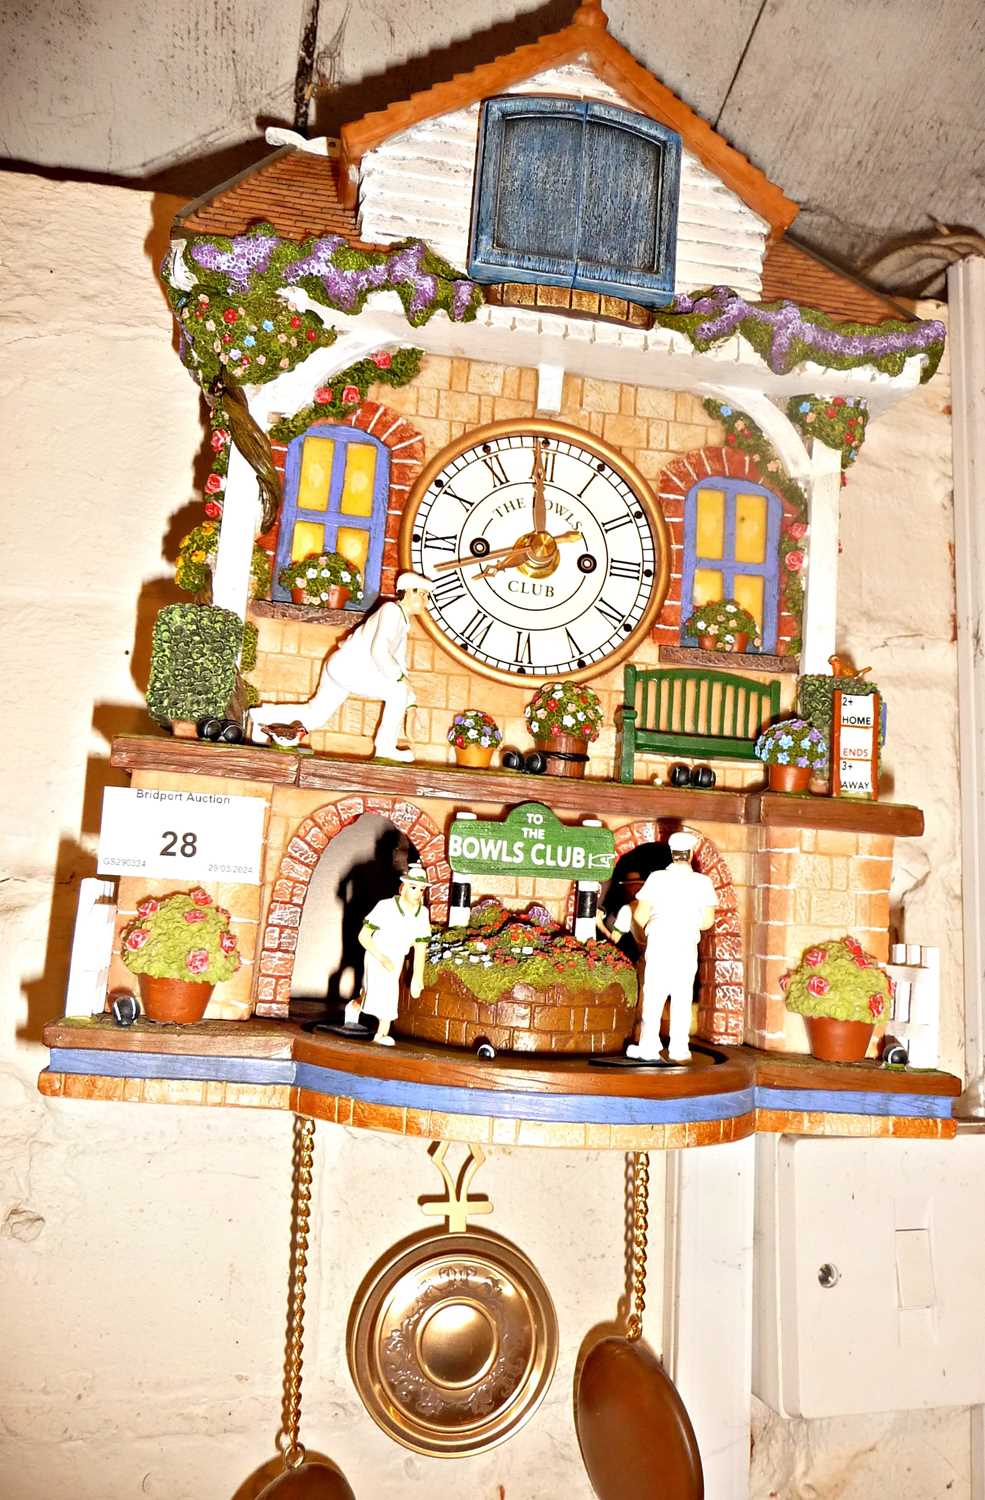 Novelty automaton cuckoo clock "Spirit of Bowls" with moving bowlers from a Bowls Club building